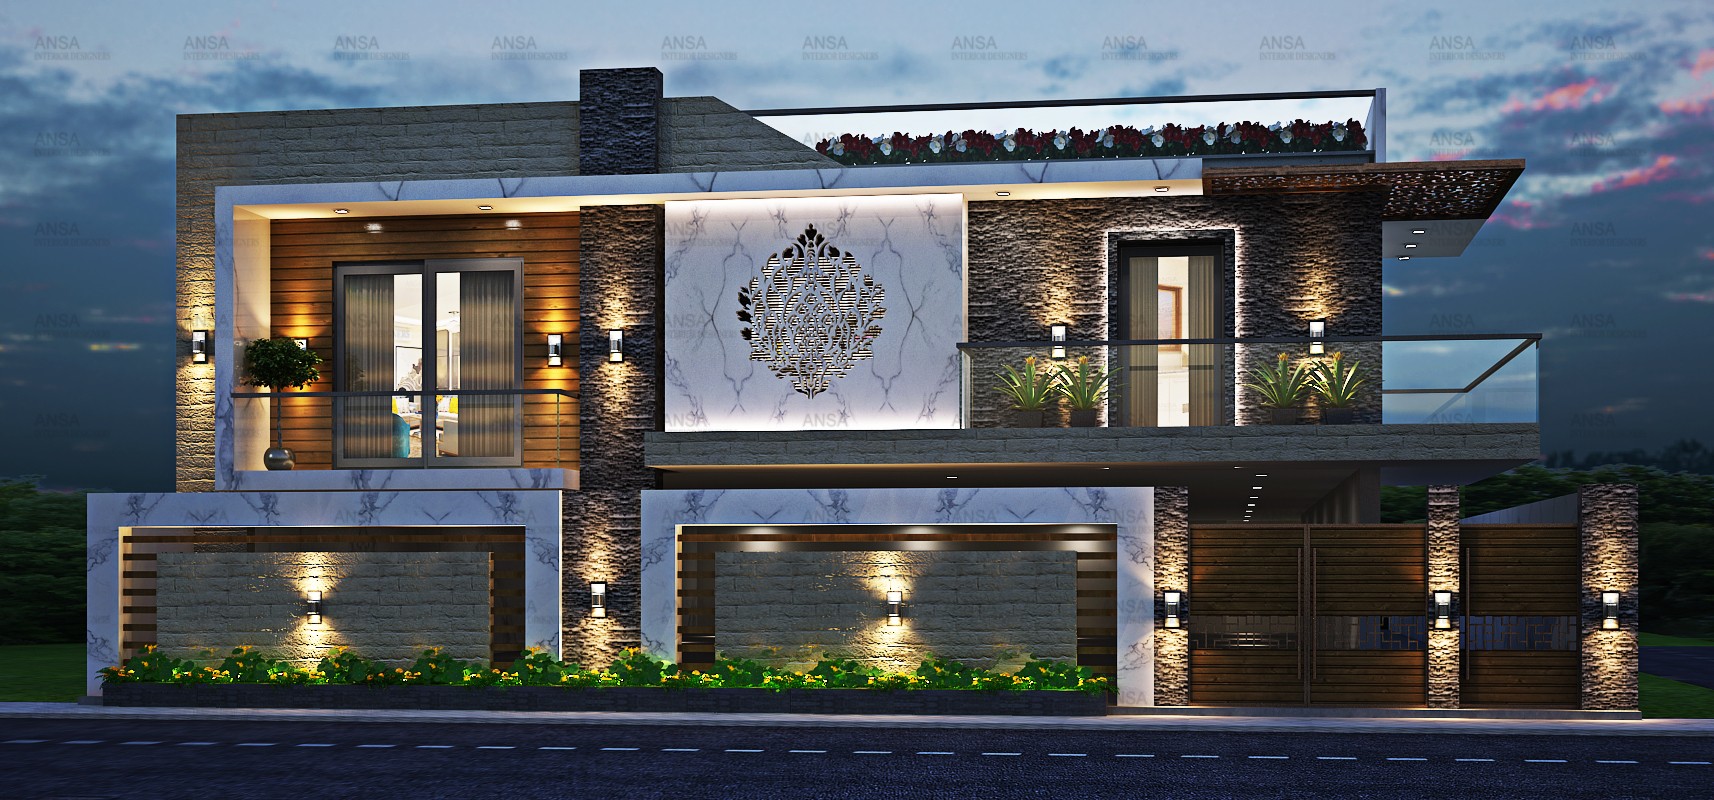 The residential facade design at chandigarh.